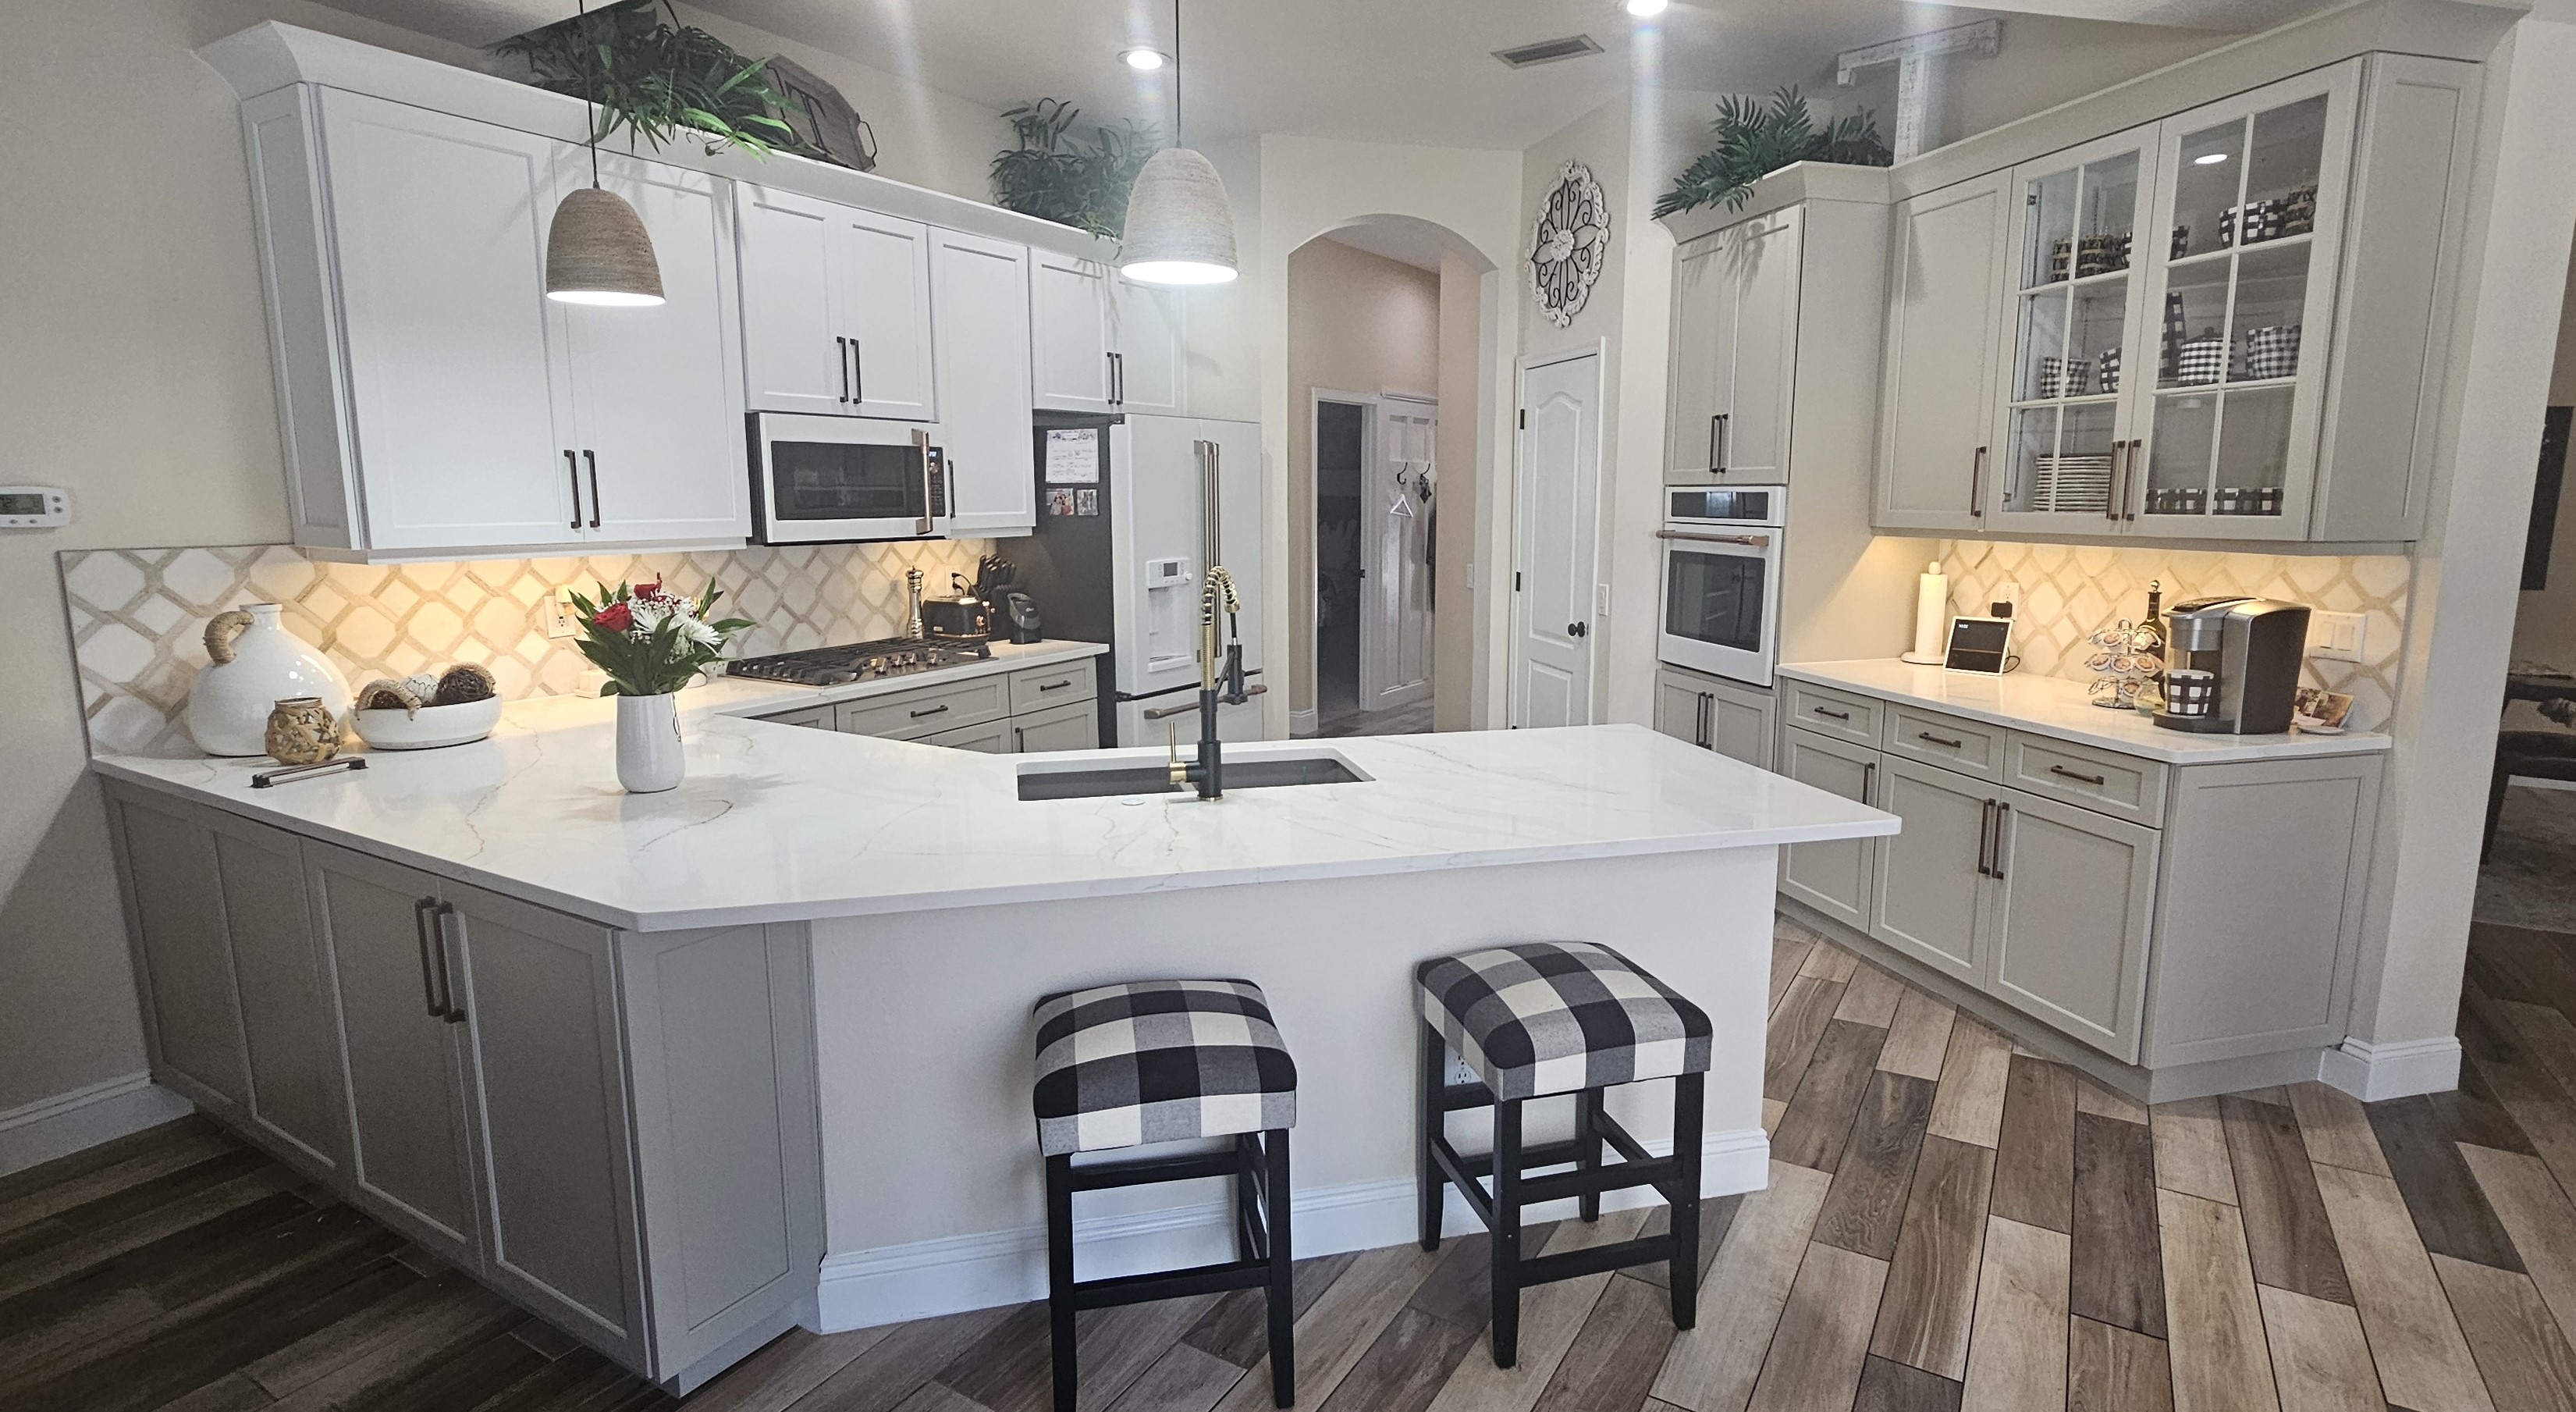 Modern appliances with a high-quality finish, granite worktops, and sleek white kitchen cabinets in Seminole.